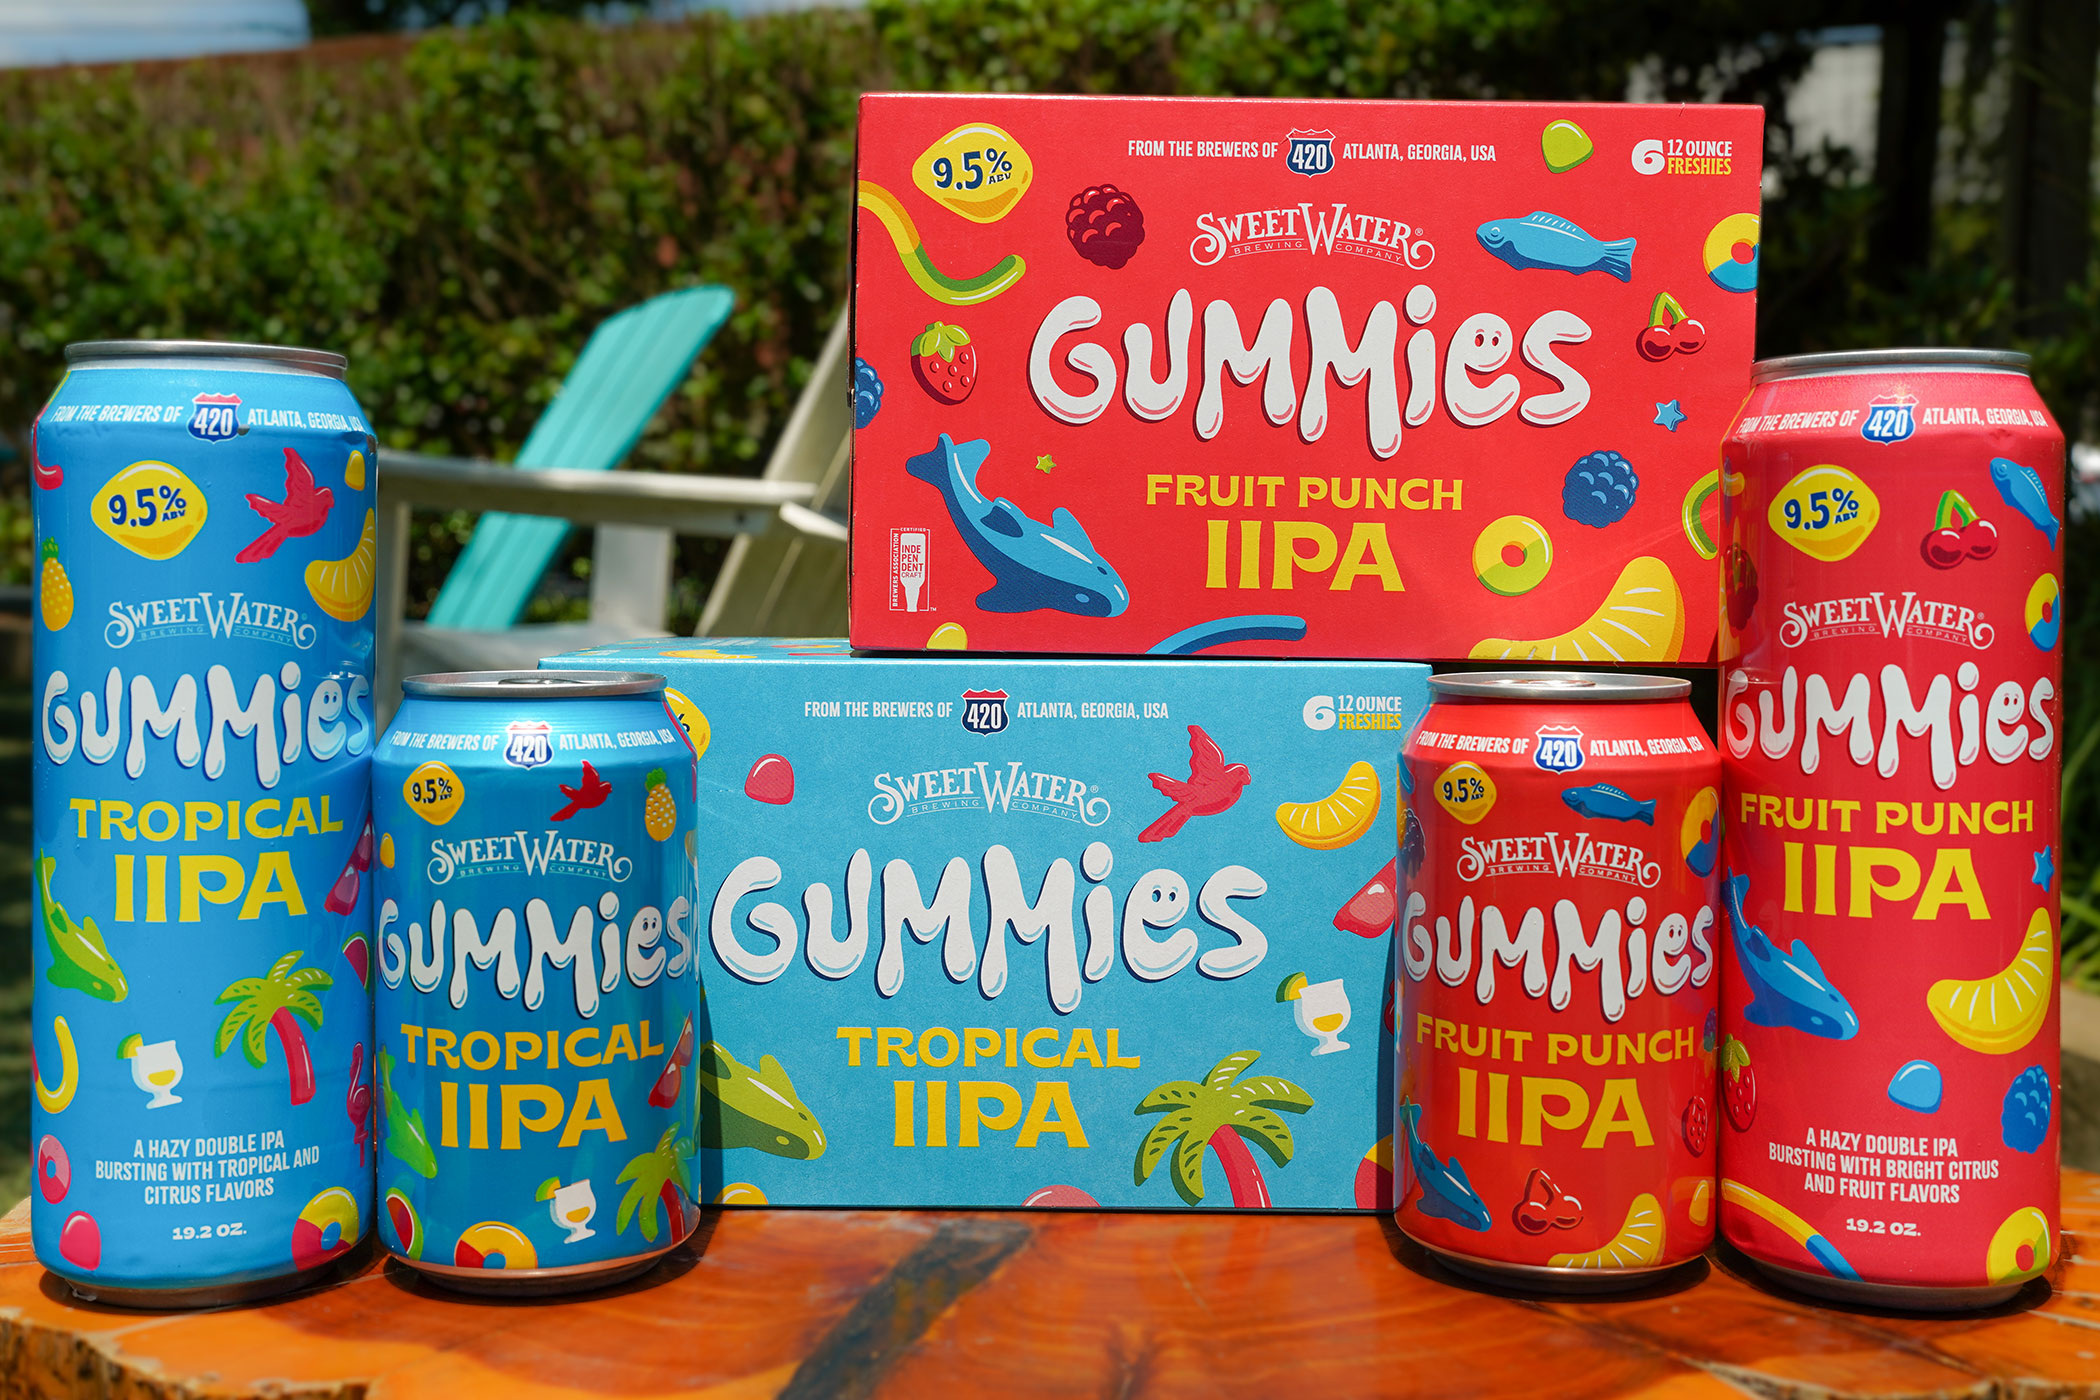 SweetWater Gummies: Take a Bite Out of These Higher ABV, Highly Juicy IIPAs